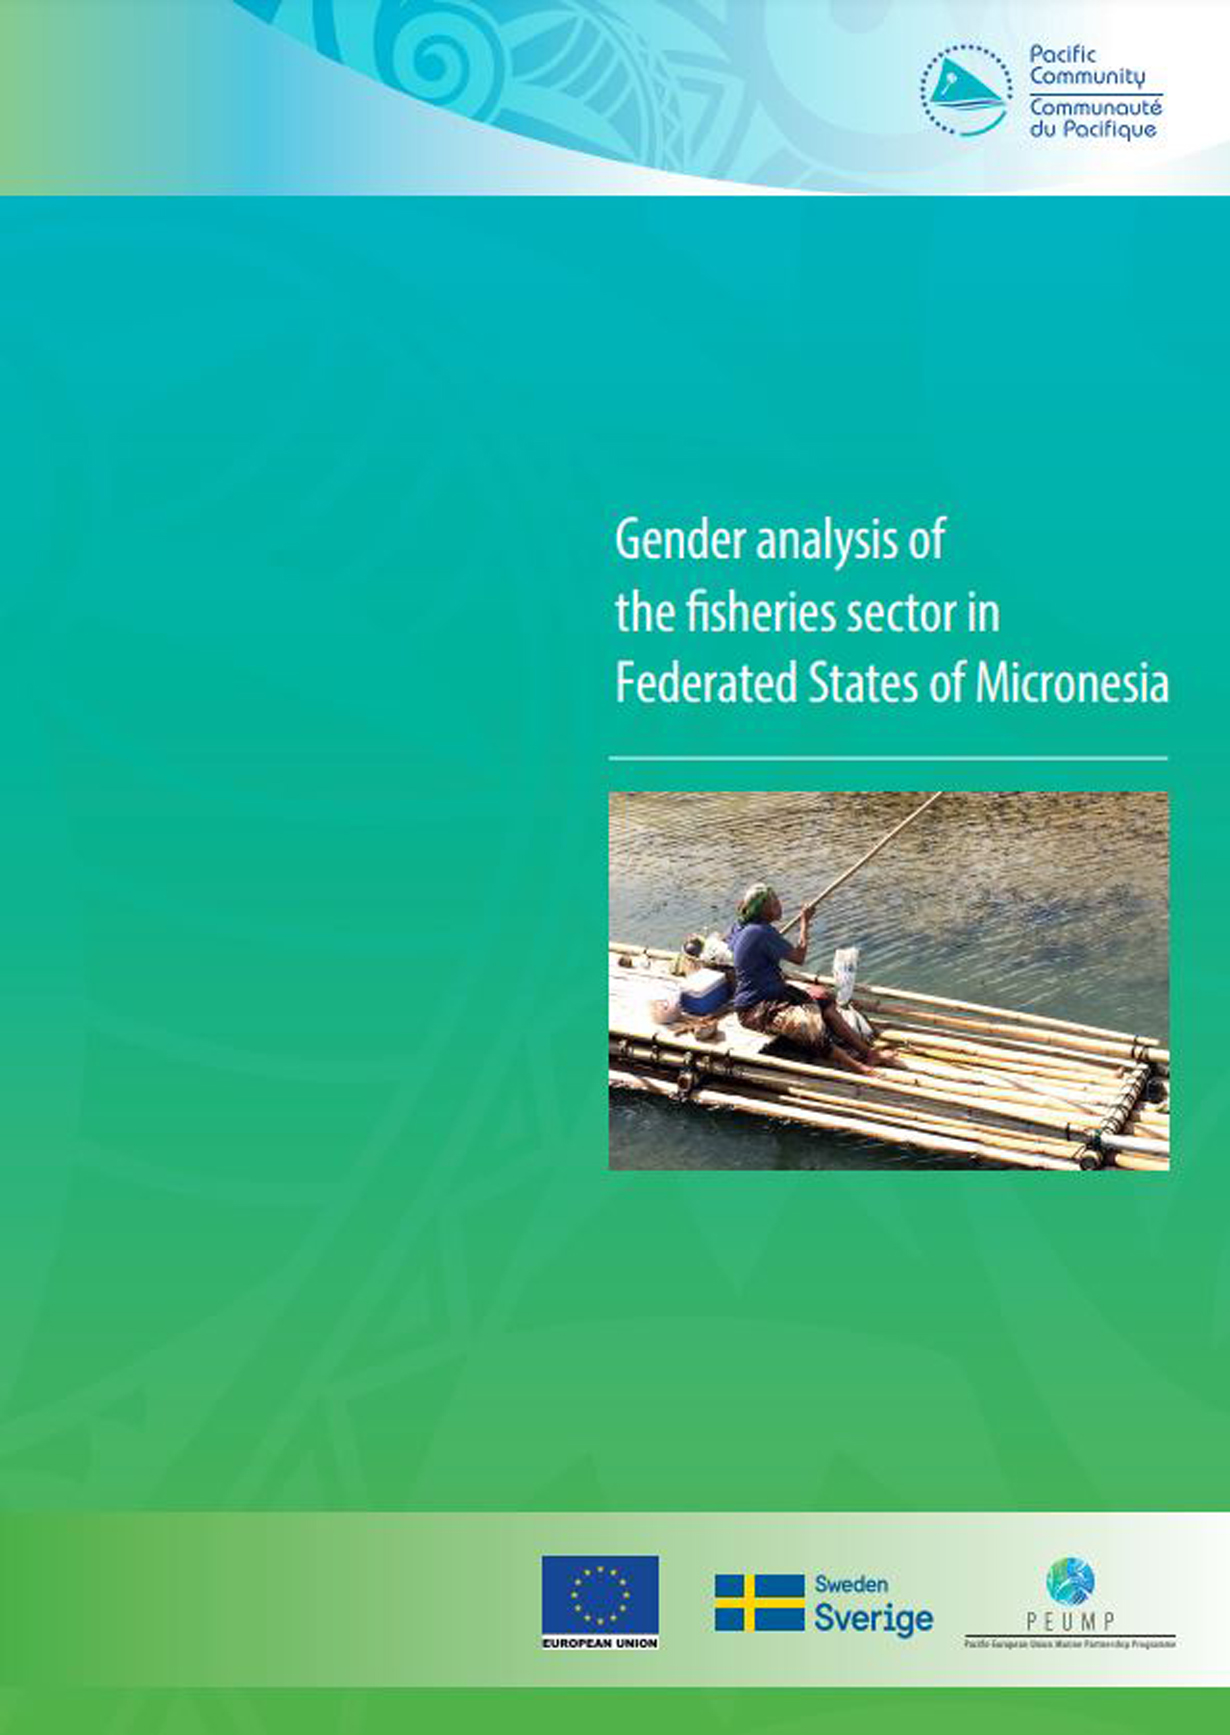 Gender analysis of the fisheries sector in Federated States of Micronesia